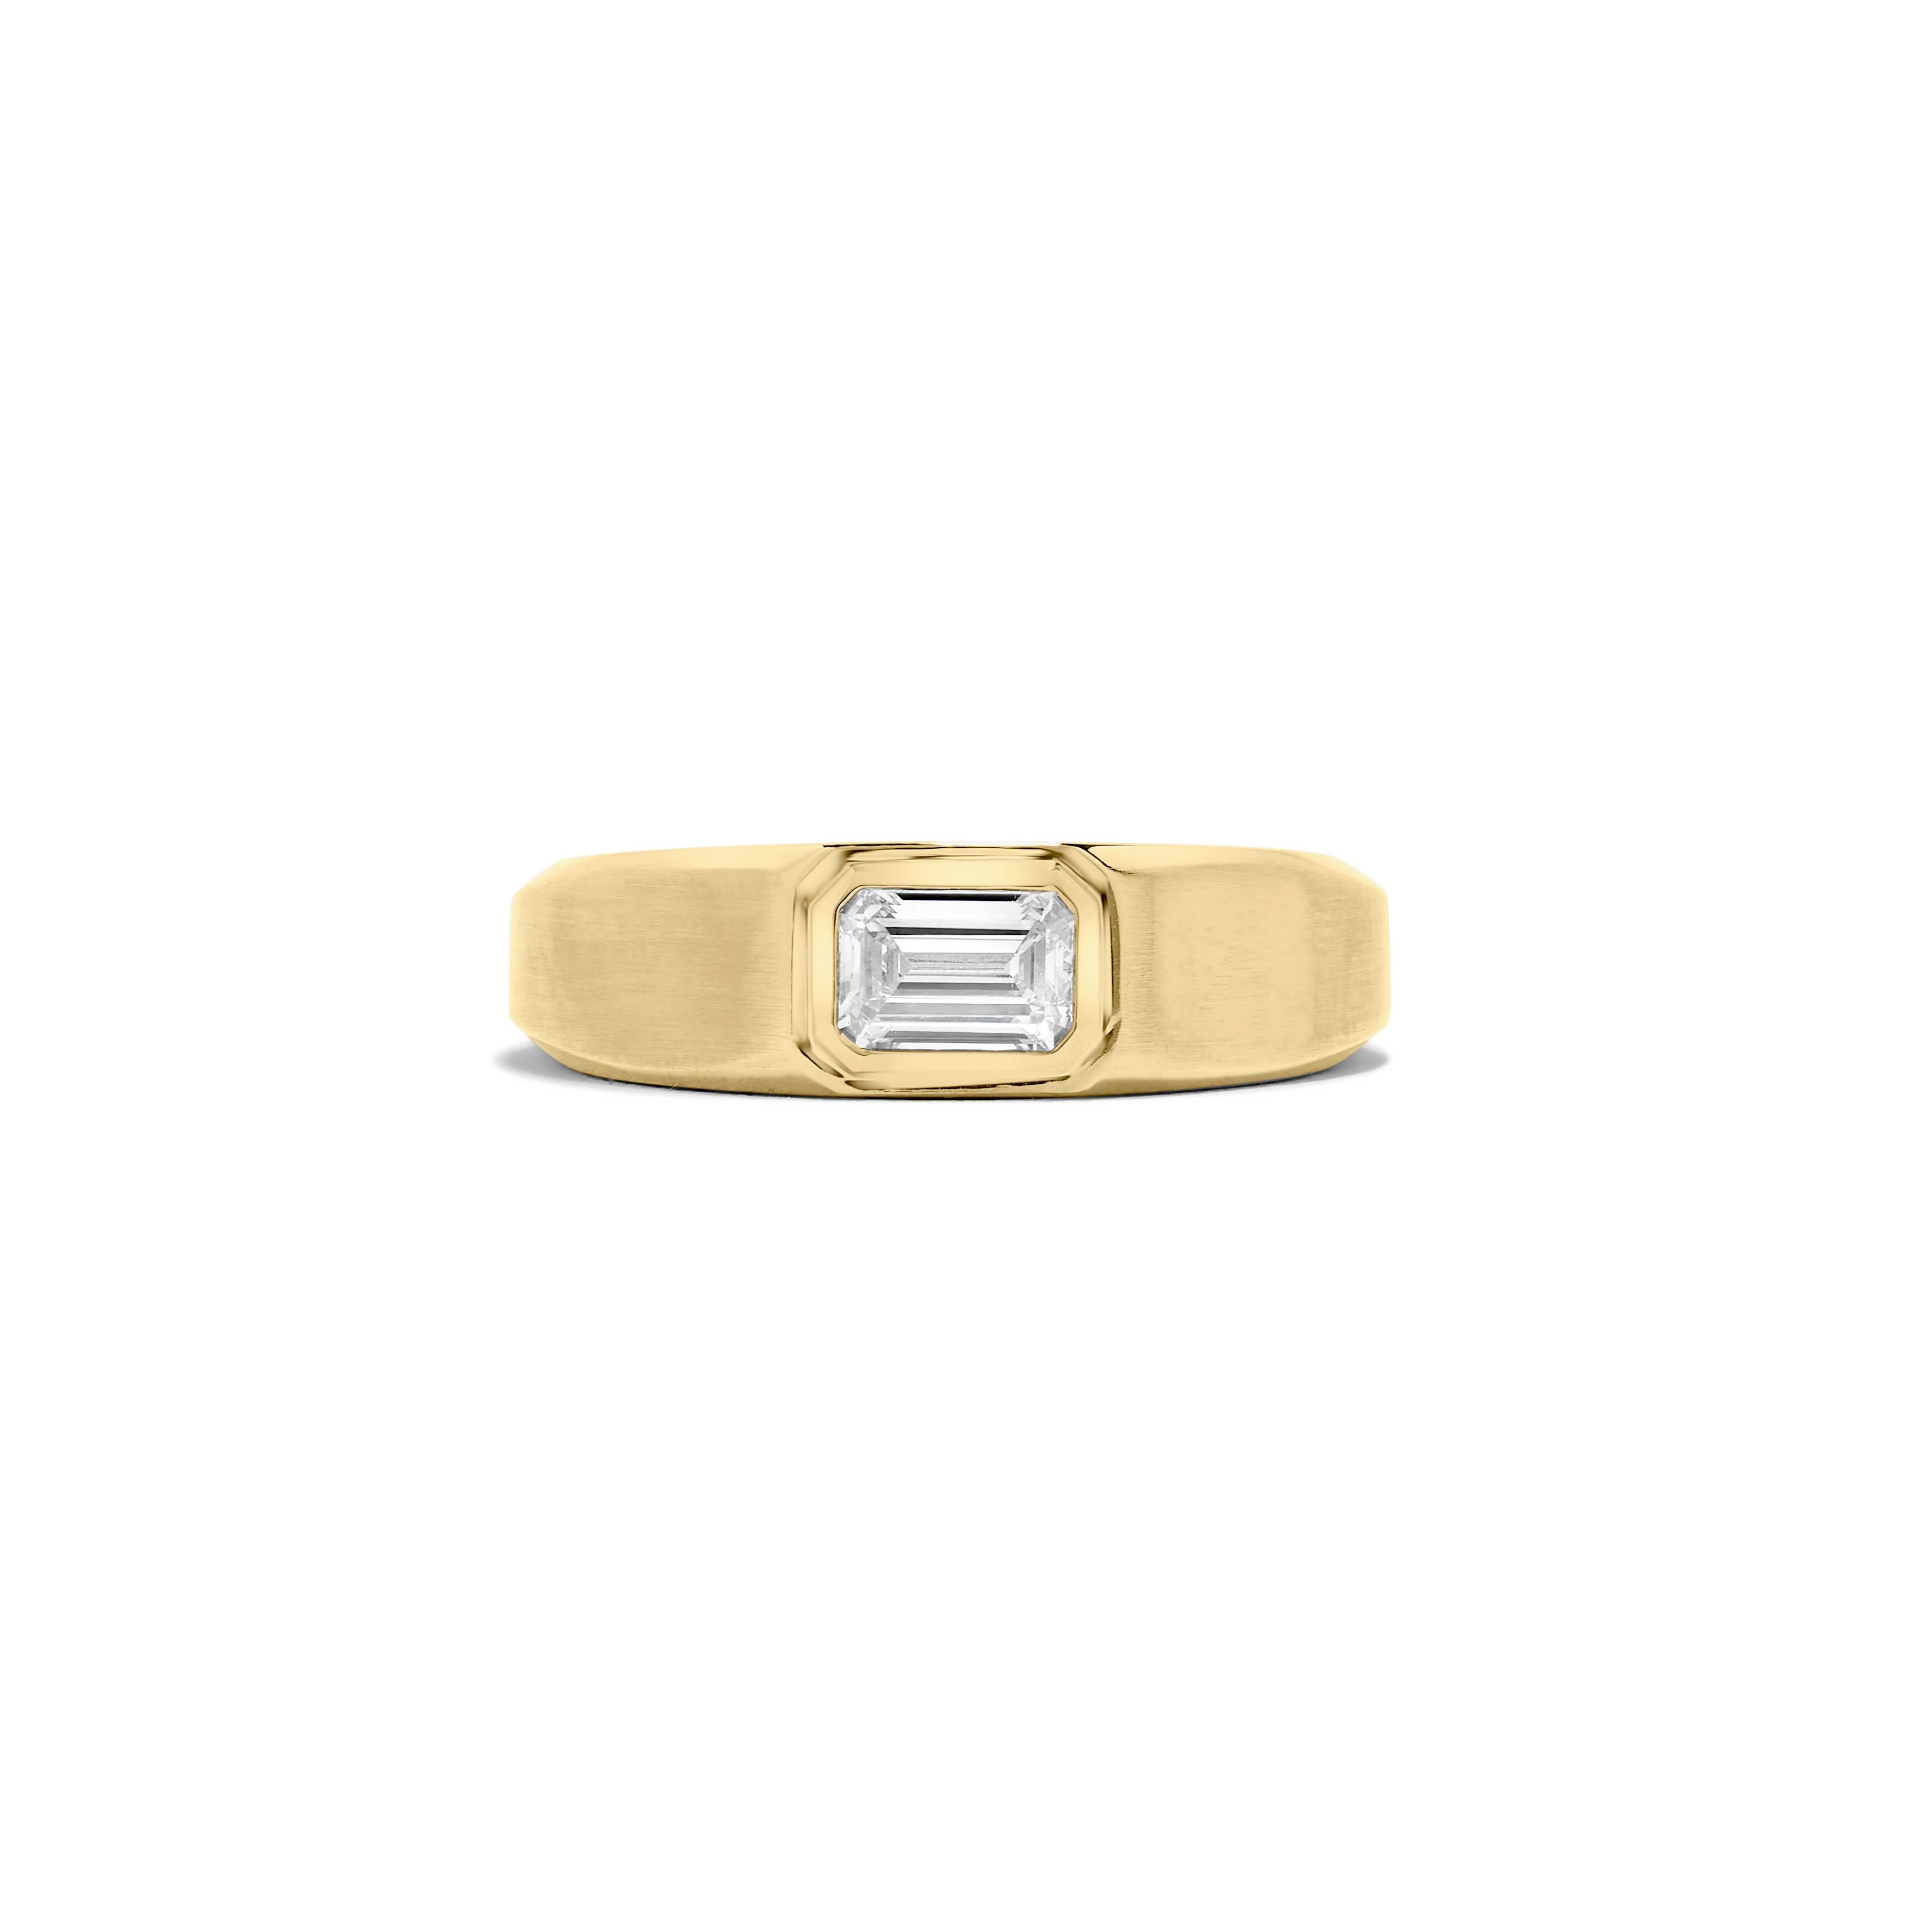 This Men's Dome ring features 0.66 carat GIA certified emerald cut J VS2 diamond set in 18k yellow gold. Size 9. Resizable upon request. 